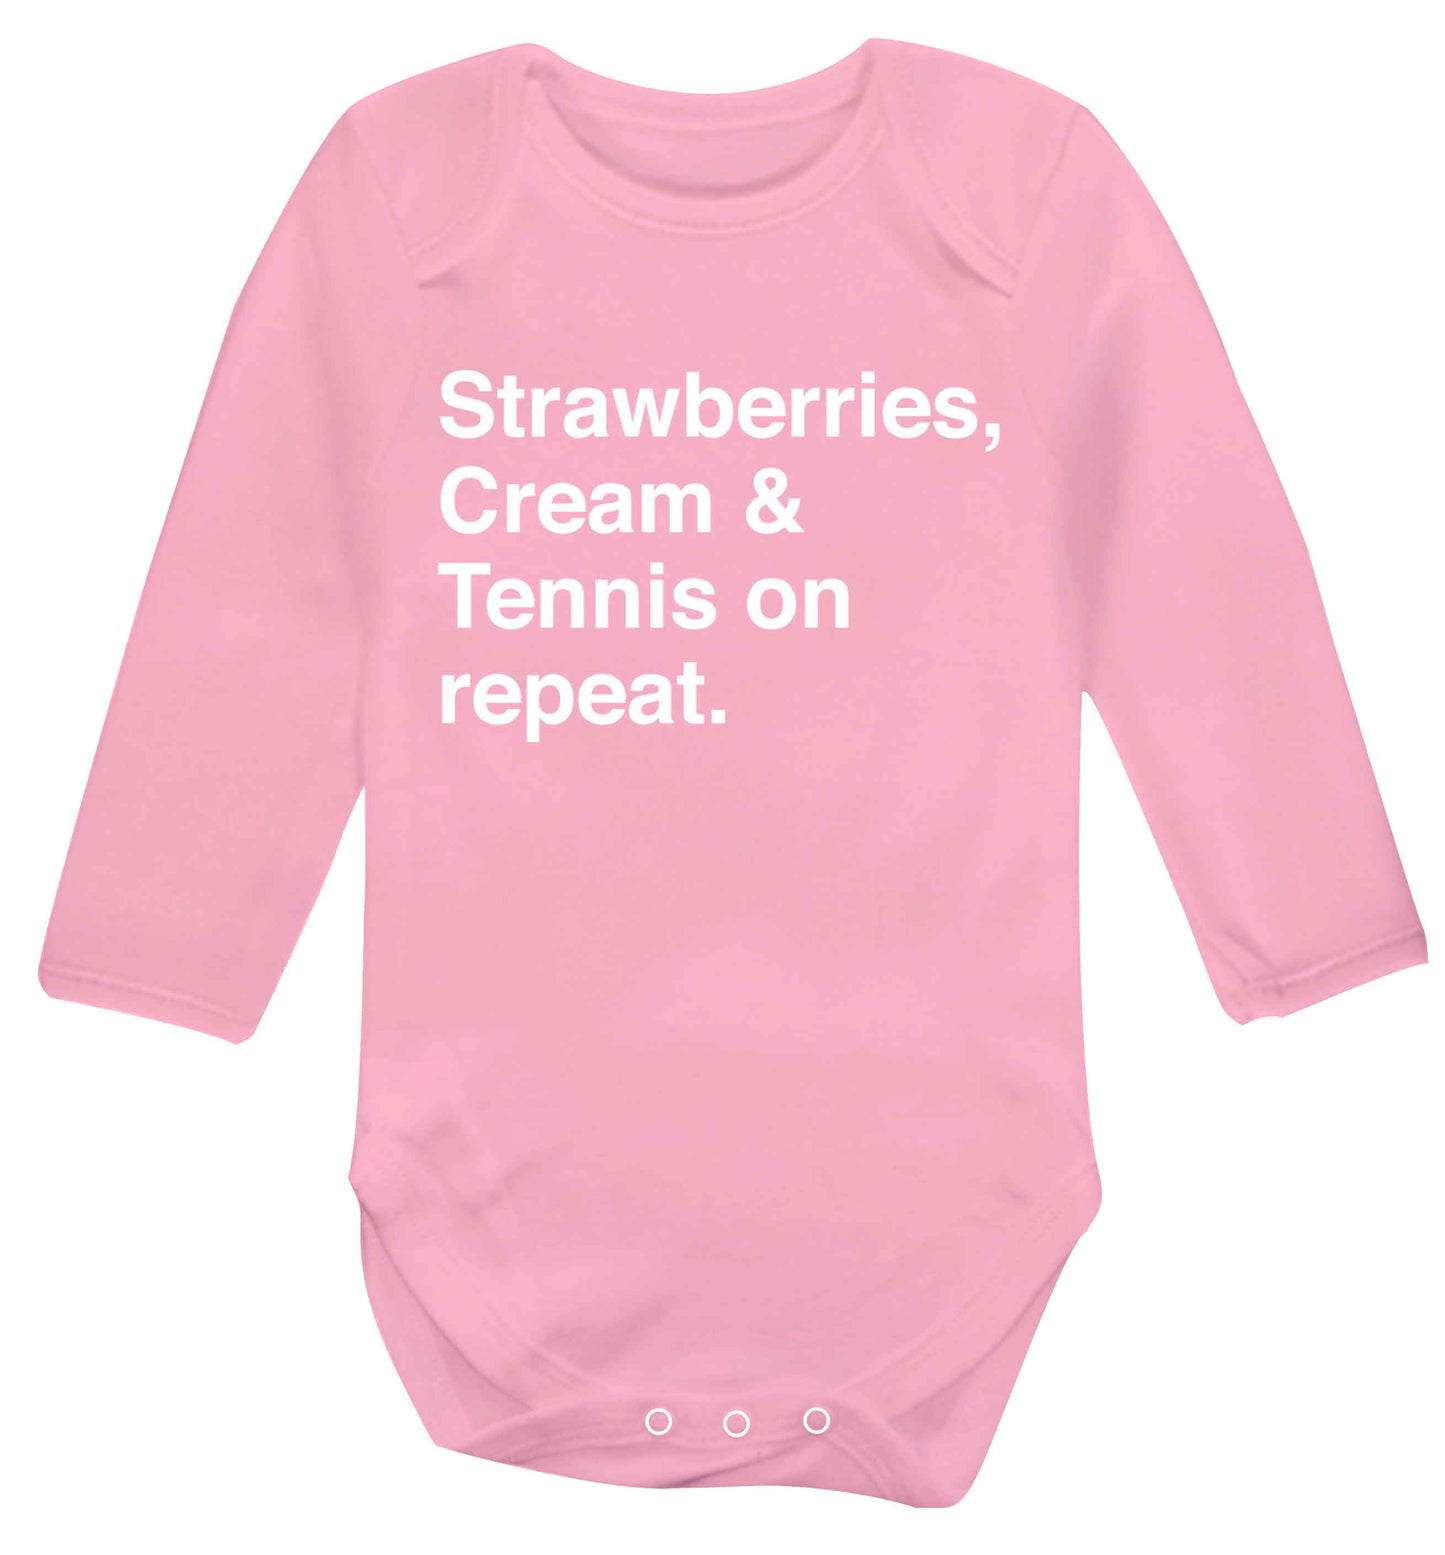 Strawberries, cream and tennis on repeat Baby Vest long sleeved pale pink 6-12 months